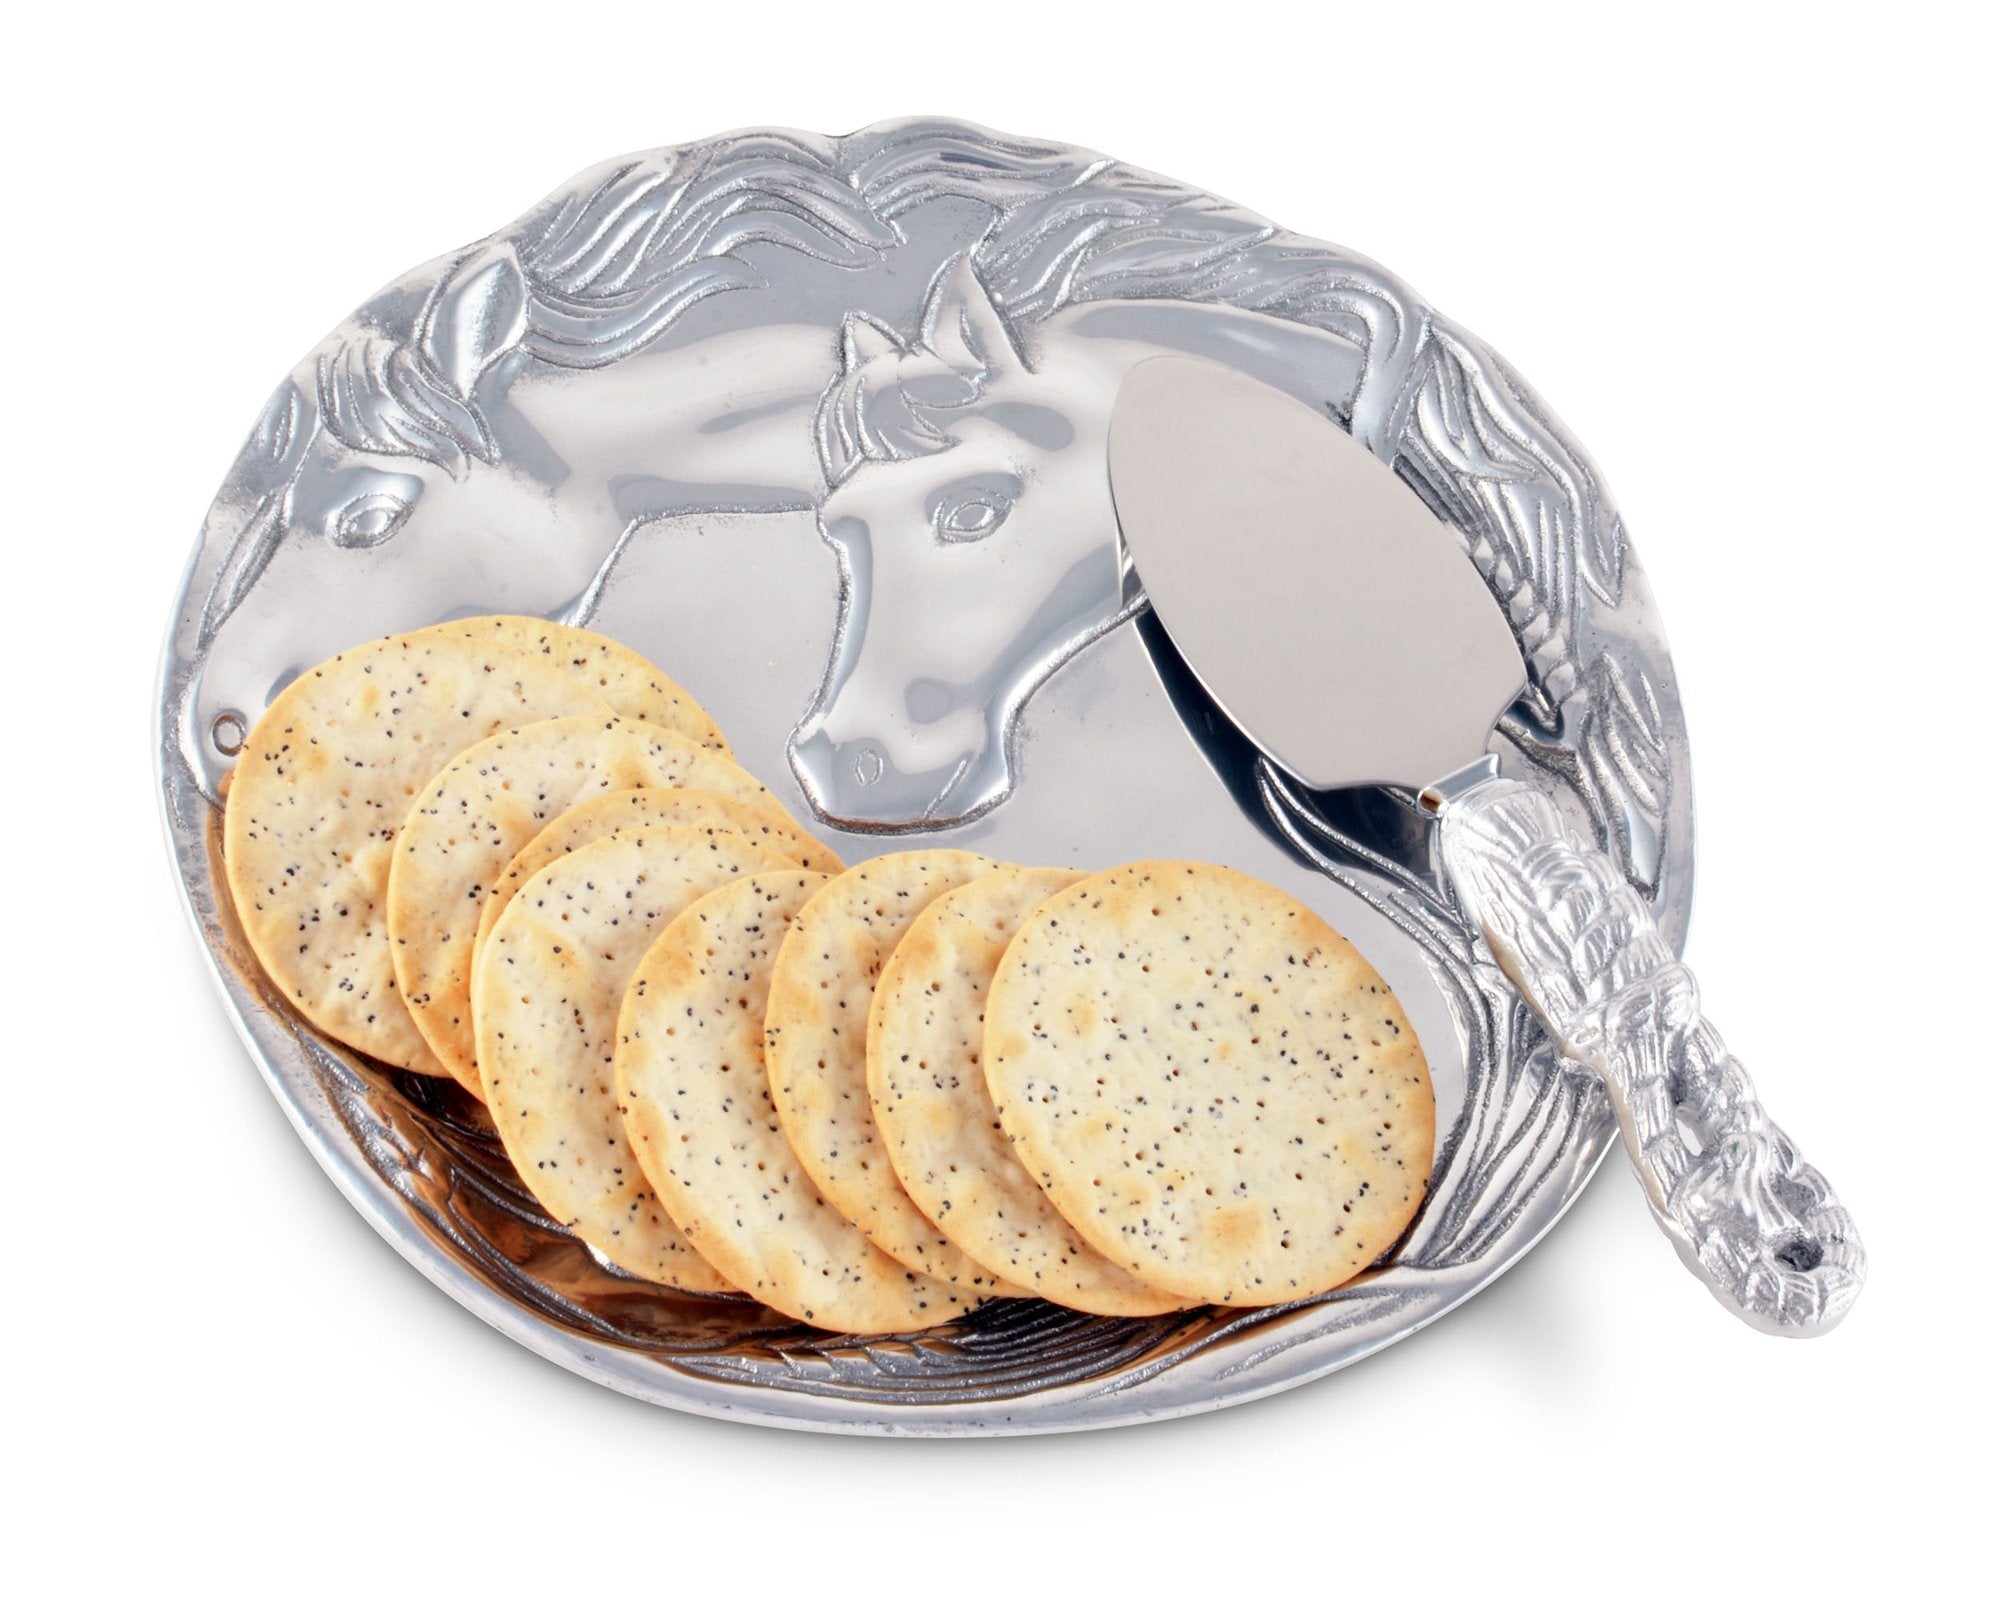 Arthur Court Horse Plate With Server